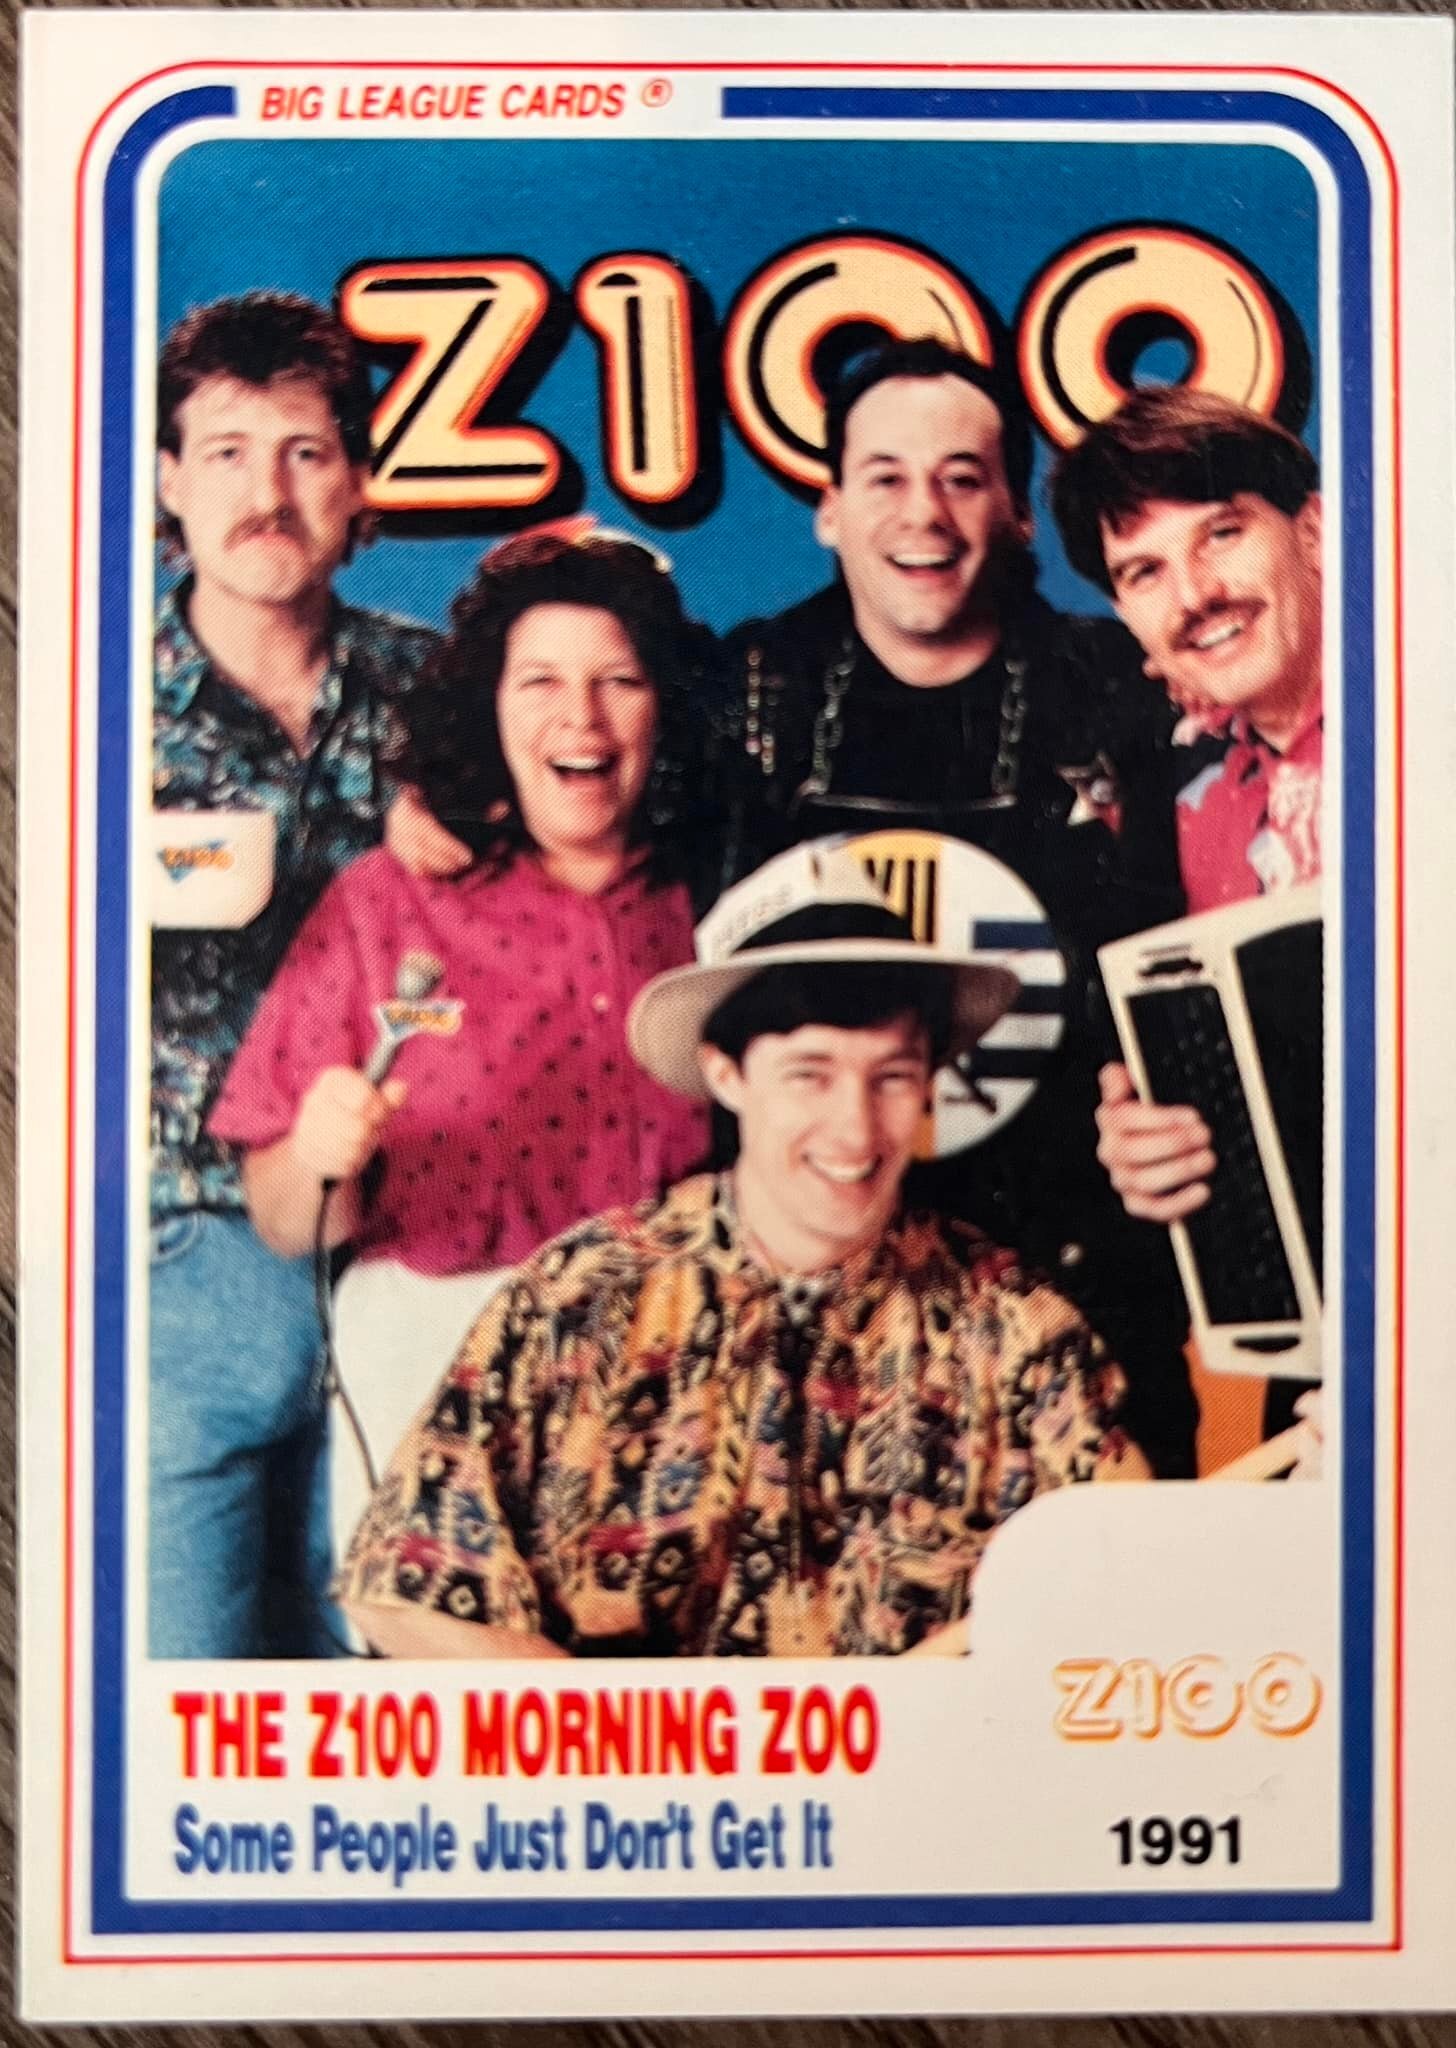 Throwback Thursday. I was going through some old sports cards aad came upon this Z100 card. In the back row is Tony Martinez, currently on mornings doing traffic at KPTV 12. #z100 #tonymartinez #KPTV